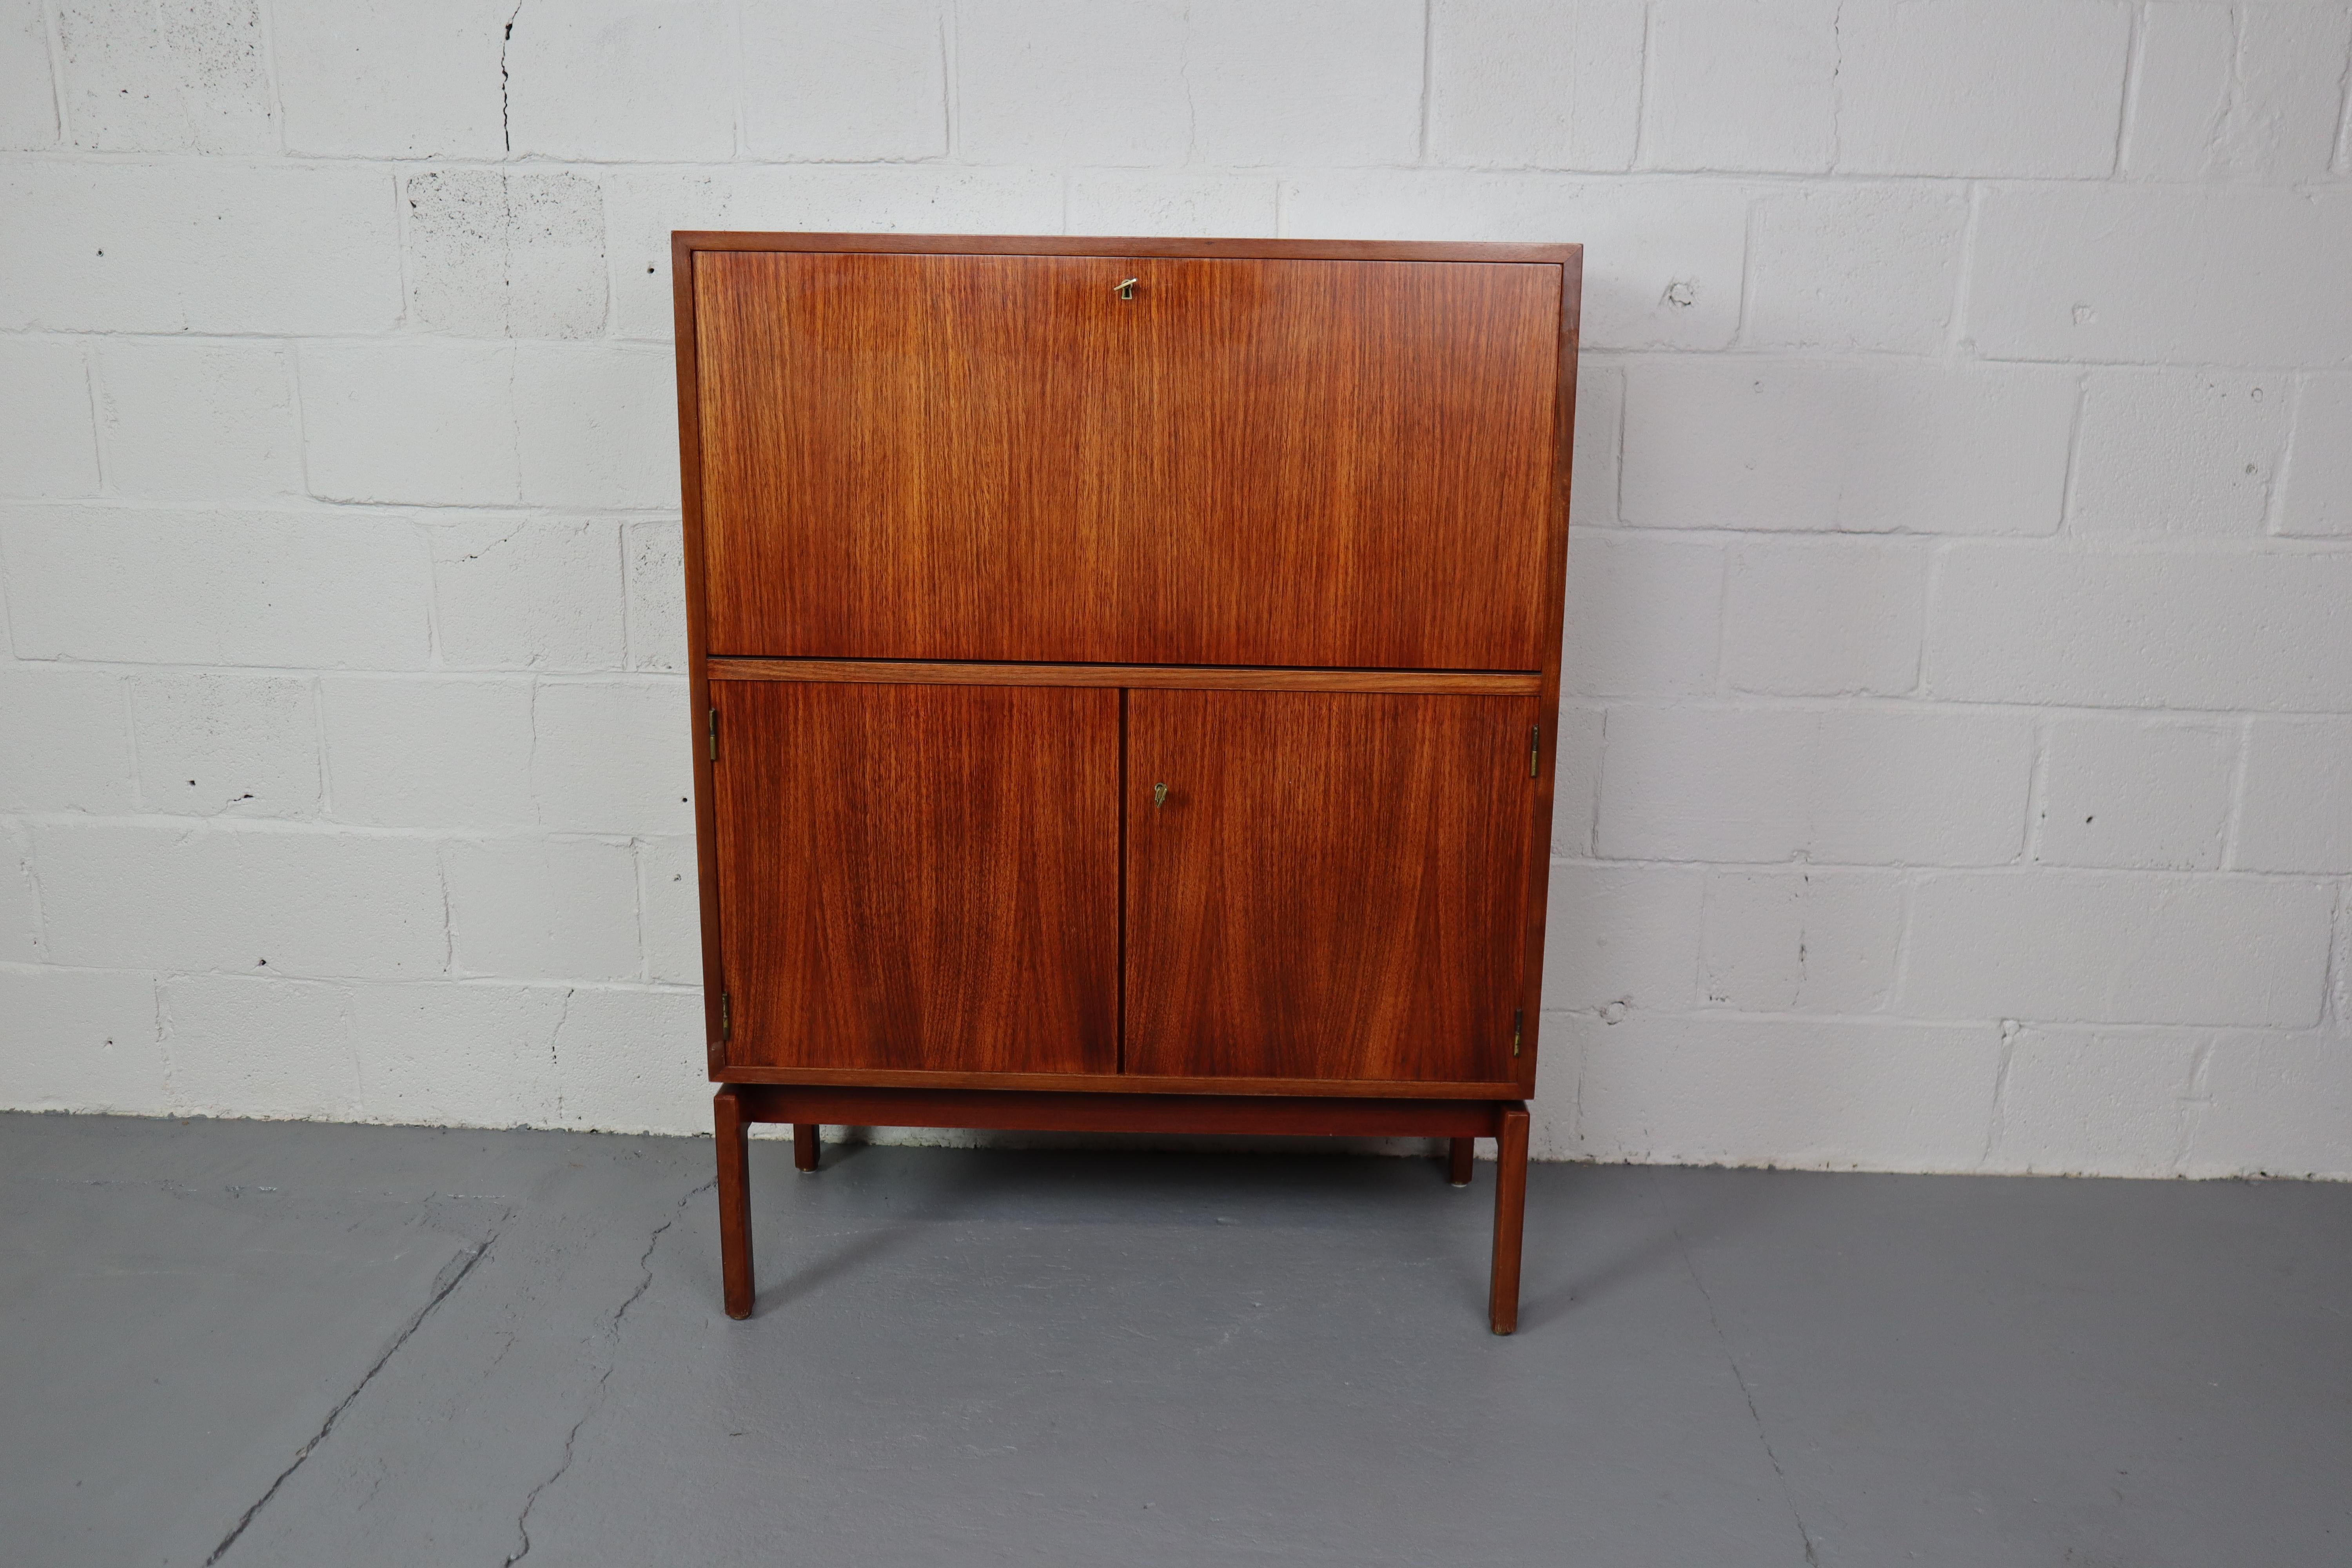 Modernist bar cabinet / secretaire by Jos De Mey for Van den Berghe-Pauvers 1960s.
This cabinet has a drop down door with lighting and 2 doors at the bottom. Top and bottom are equipped with the original brass keys.
114x86x43cm
The cabinet has